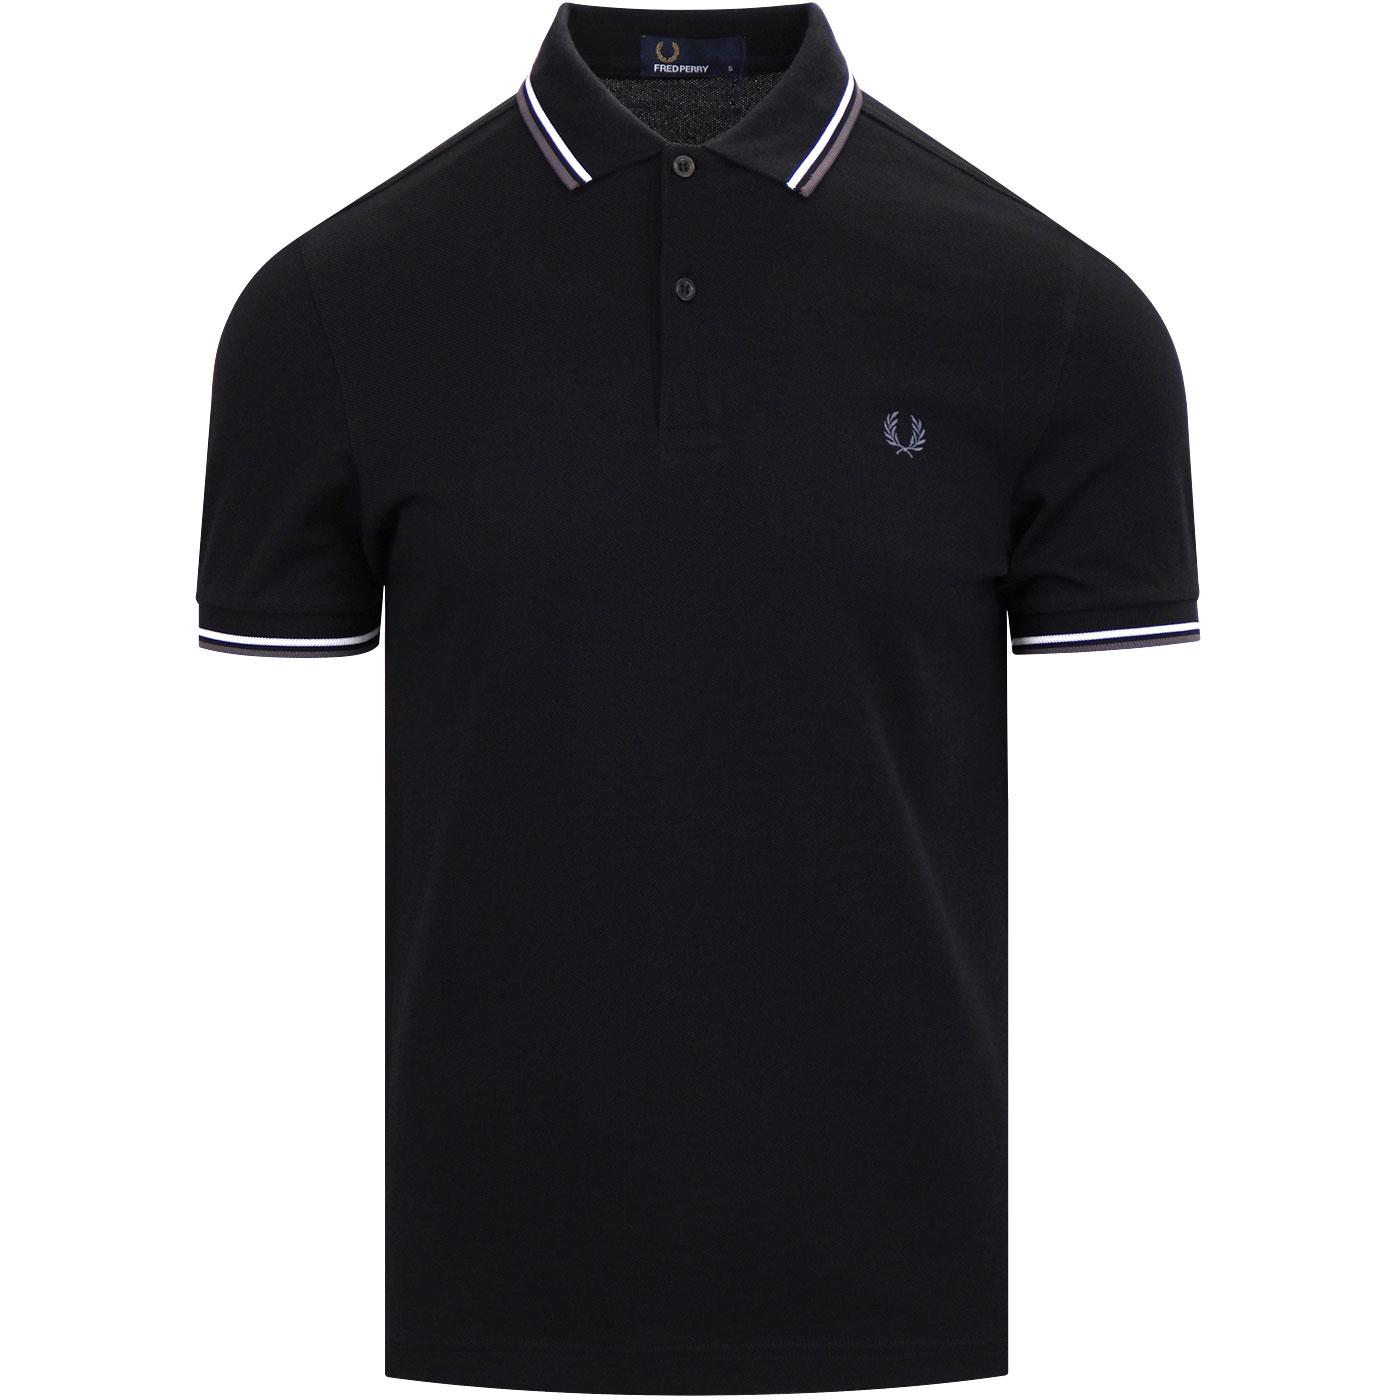 FRED PERRY M3600 Men's Twin Tipped Polo B/W/G